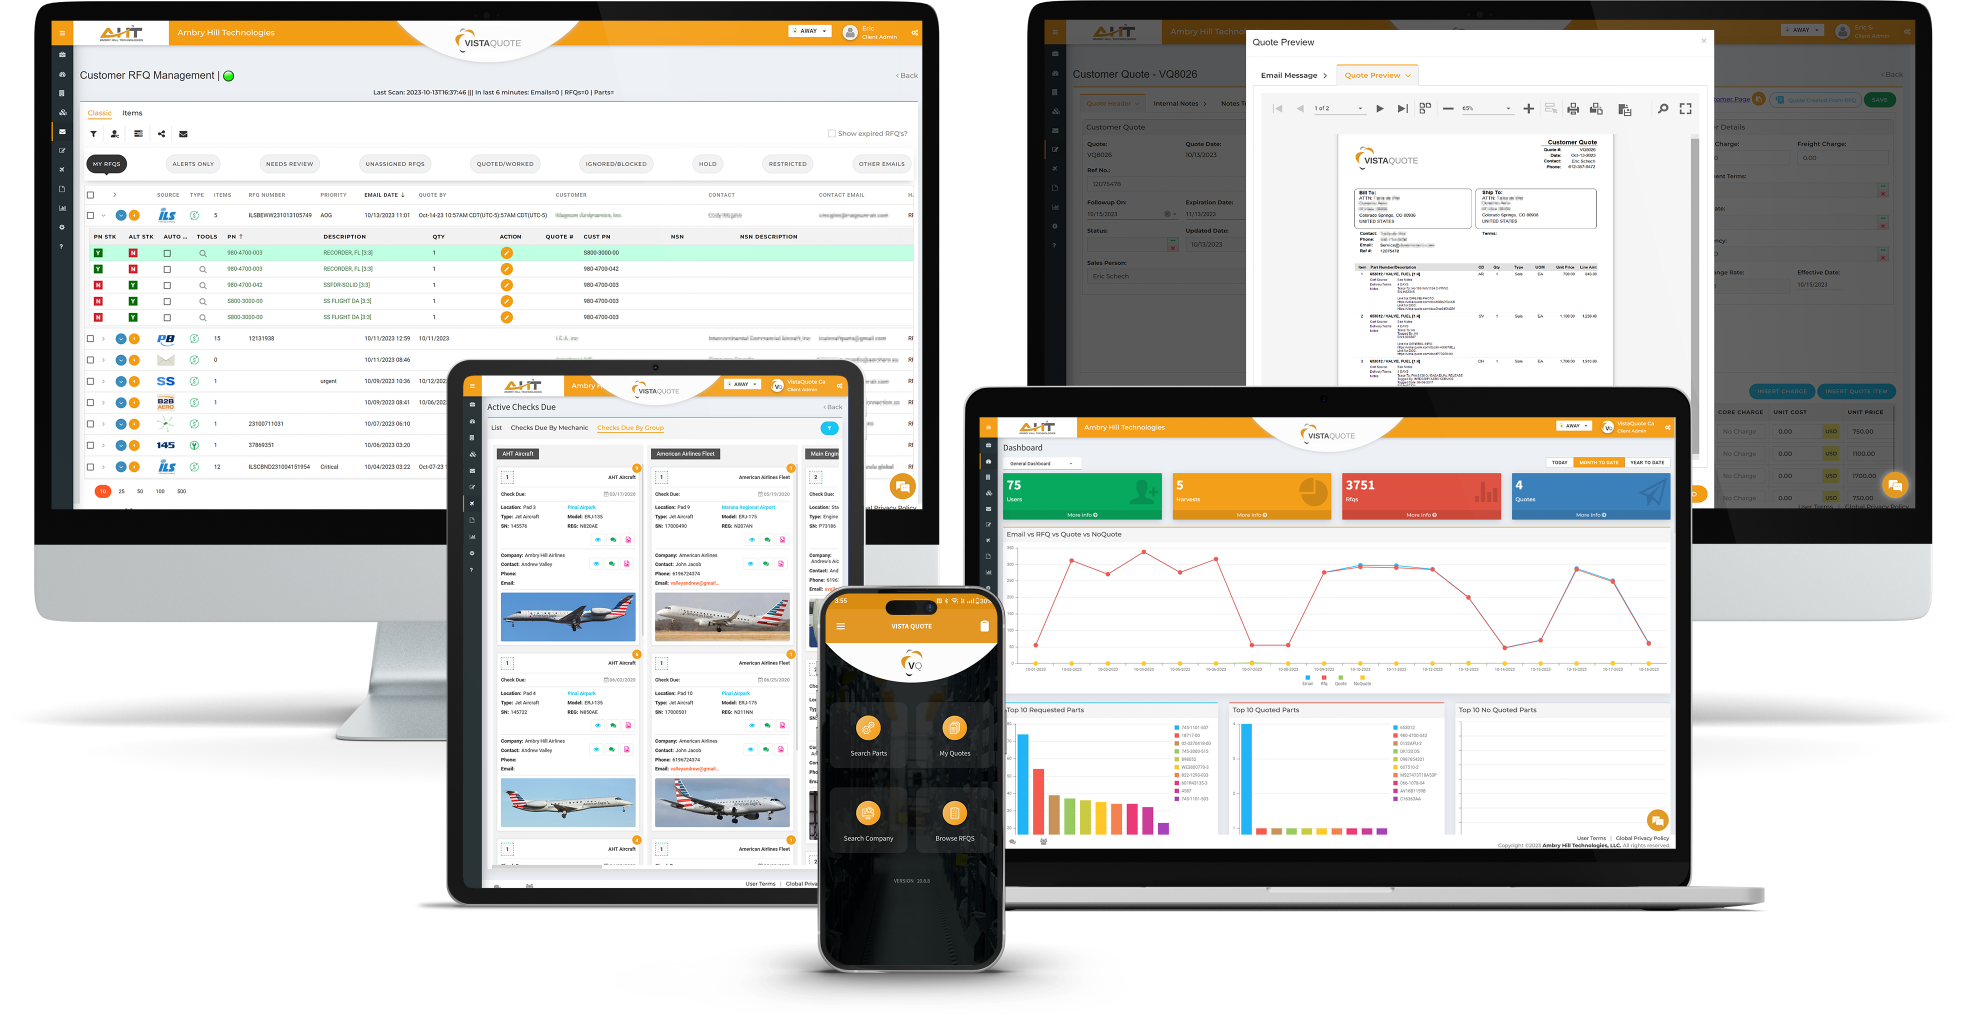 VistQuote is a cloud based alternative to legacy aviation ERP Software and has a mobile app for iOS and Android devices.